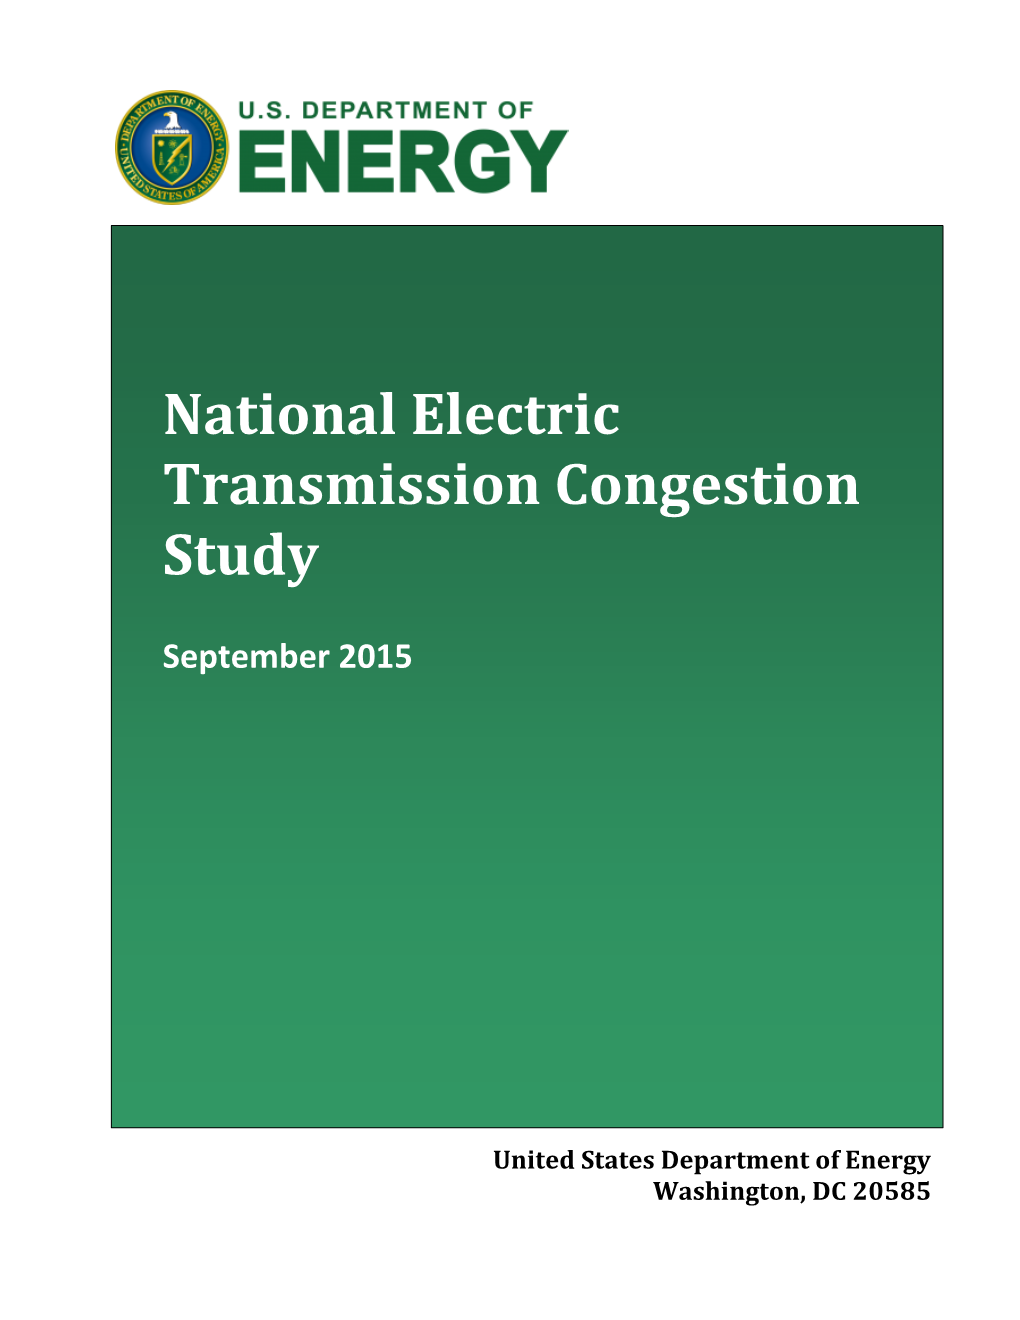 2015 National Electric Transmission Congestion Study